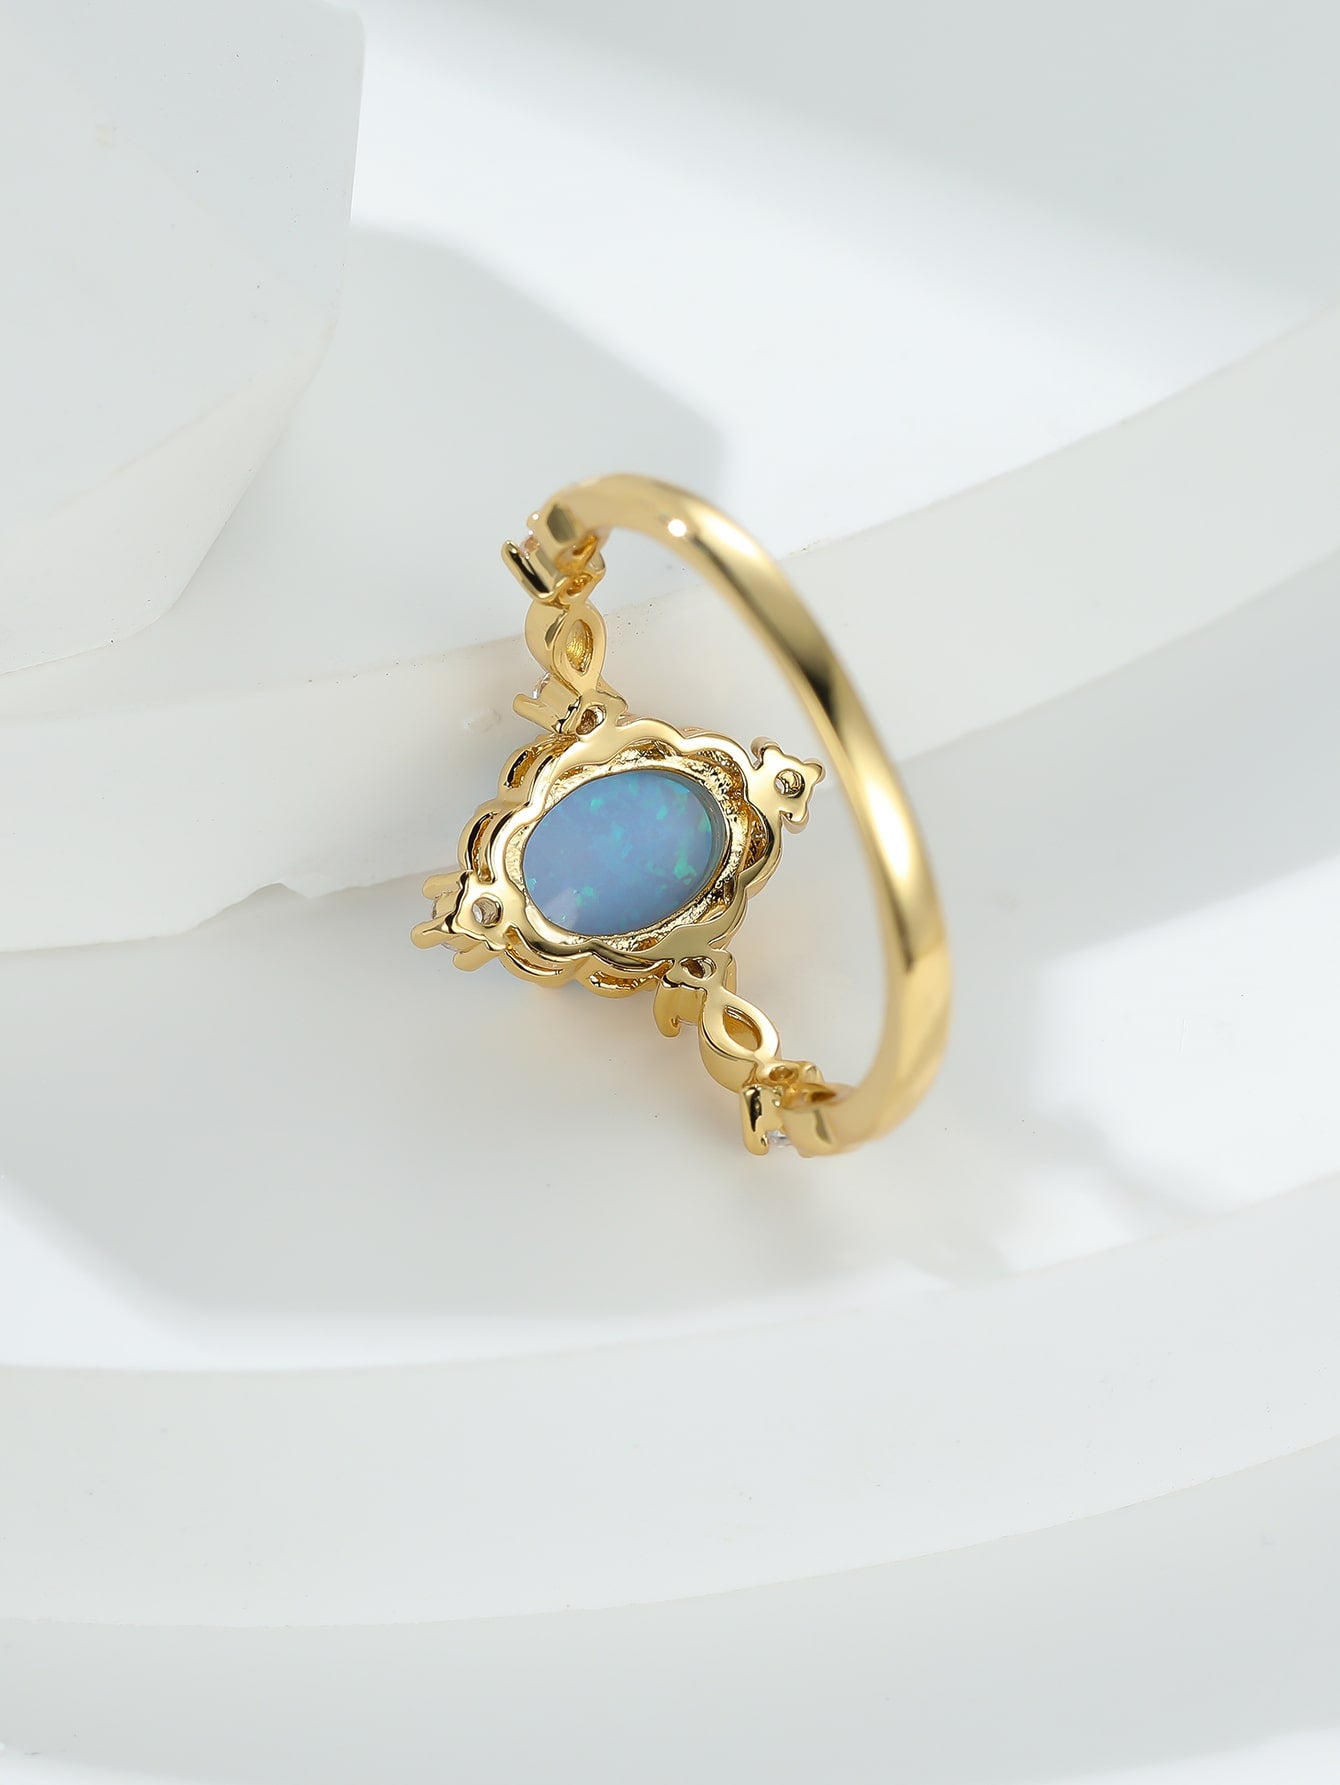 Palace Style 4-prong Setting Artificial Opal Ring In Egg Shape - Golden